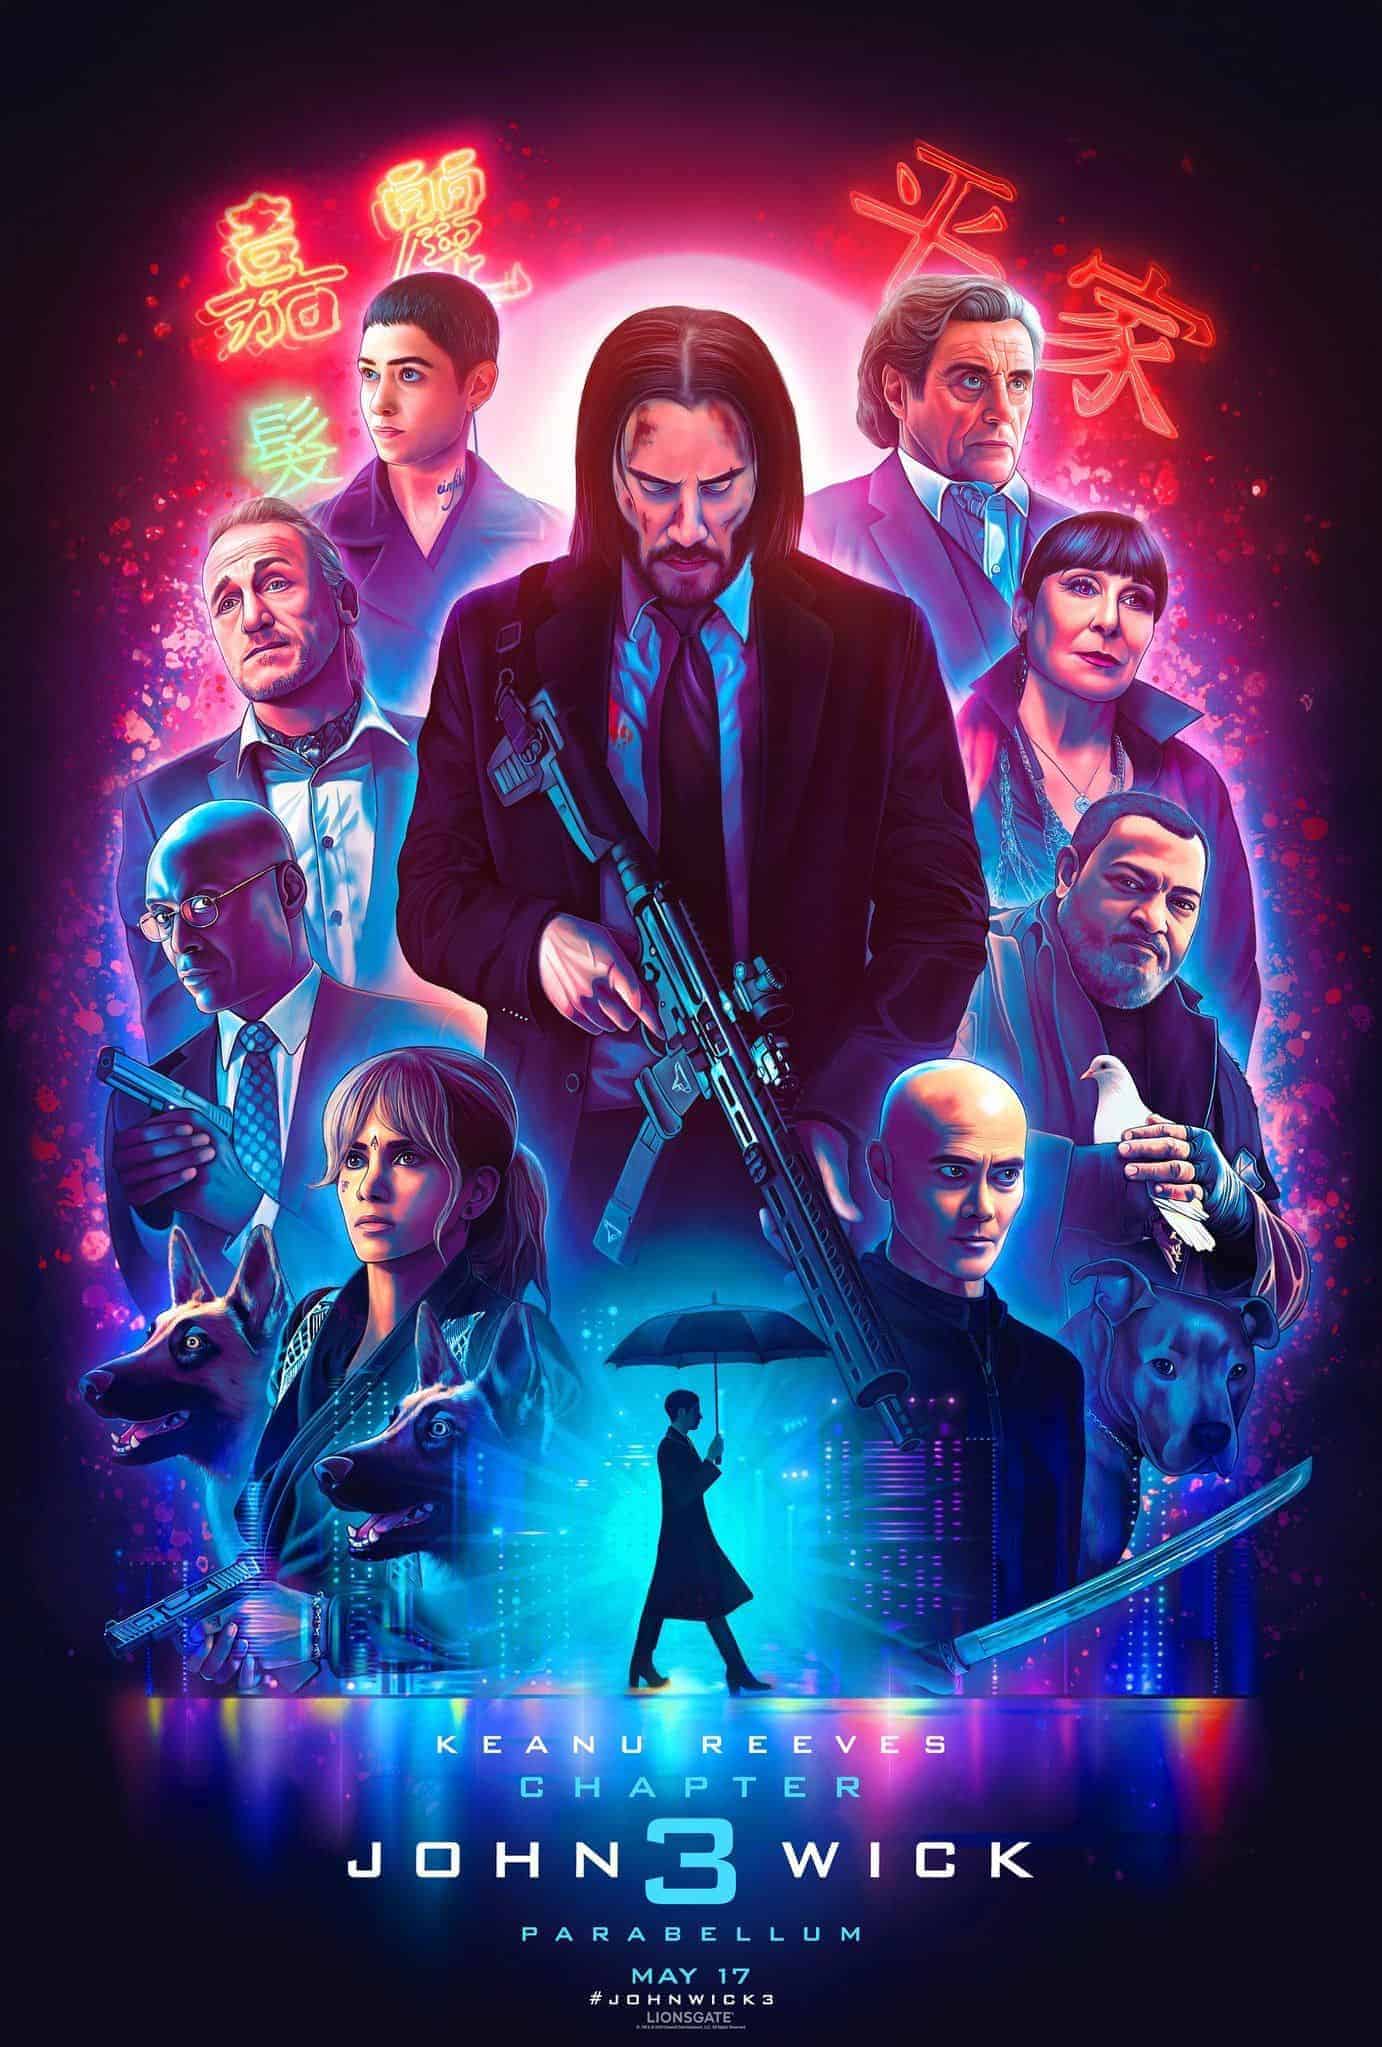 John Wick: Chapter 3 - Parabellum 2019 Tamil Dubbed Action Movie Online